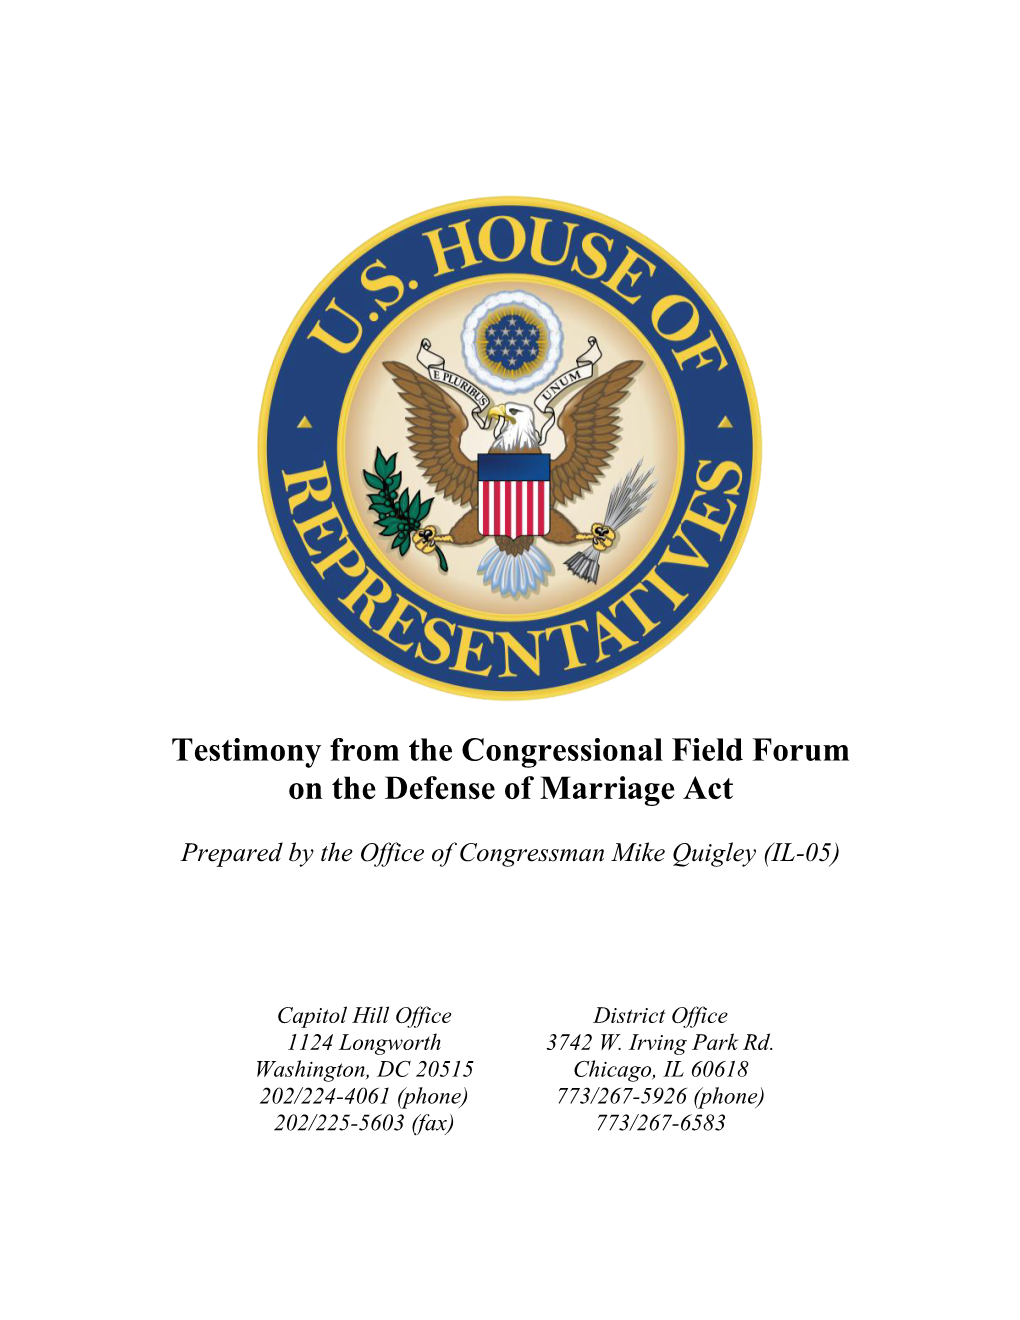 Testimony from the Congressional Field Forum on the Defense of Marriage Act